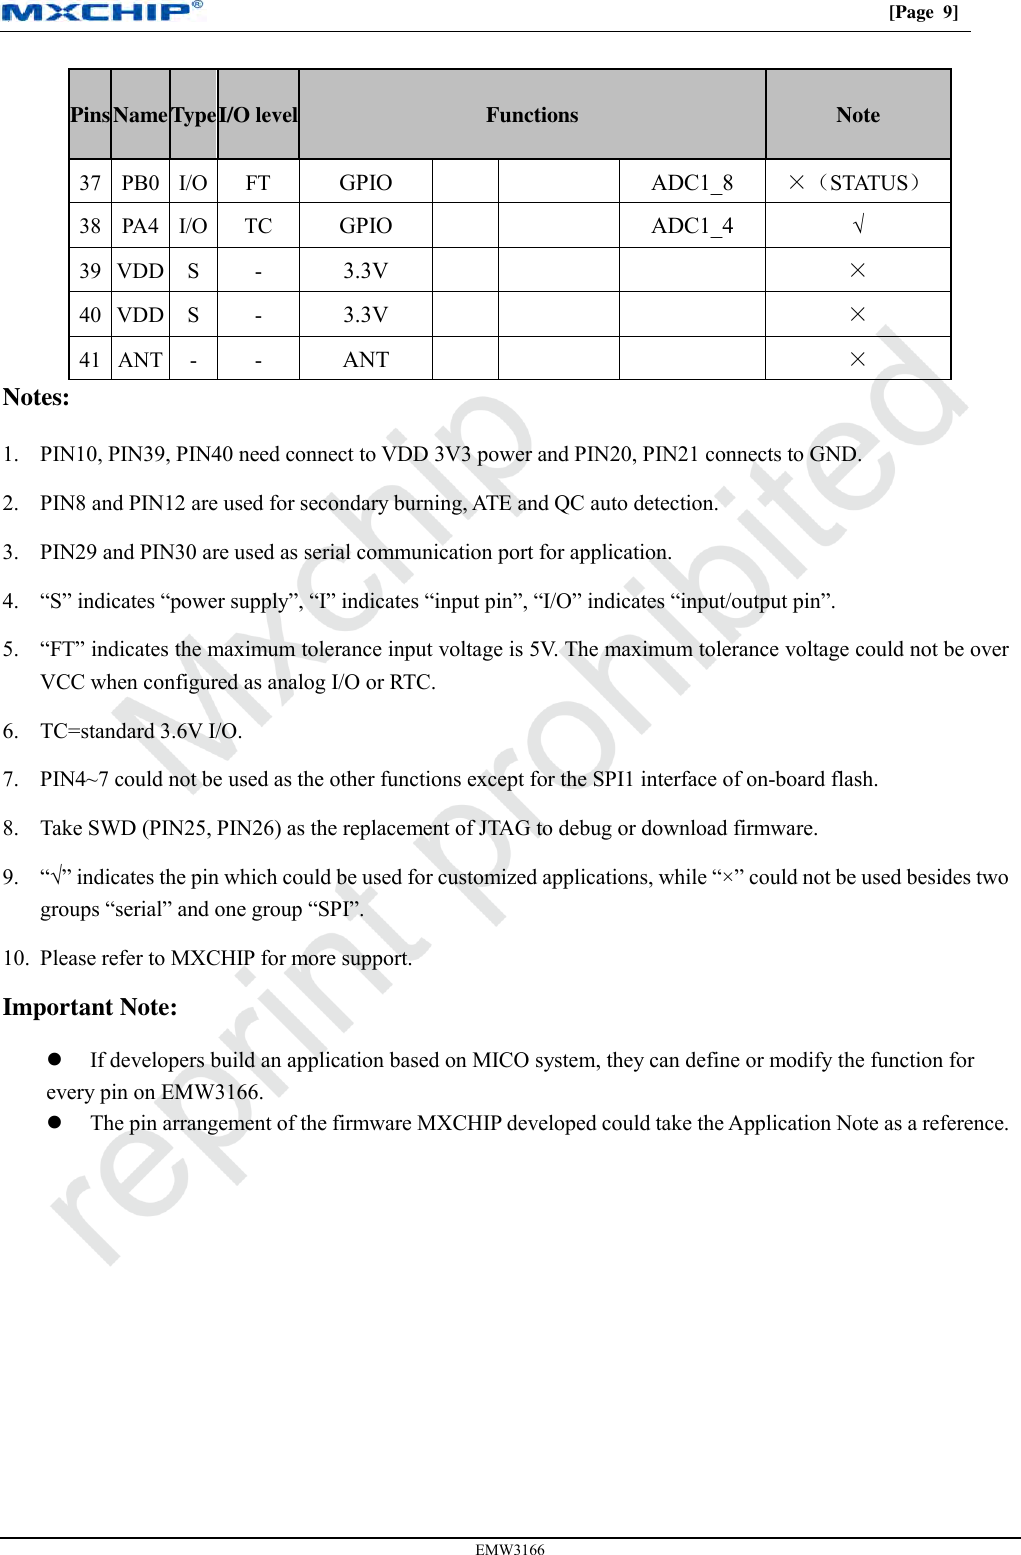 [Page  9] EMW3166 Pins Name Type I/O level Functions Note 37 PB0 I/O FT GPIO ADC1_8 ×（STATUS） 38 PA4 I/O TC GPIO ADC1_4 √ 39 VDD S - 3.3V × 40 VDD S - 3.3V × 41 ANT - - ANT × Notes: 1. PIN10, PIN39, PIN40 need connect to VDD 3V3 power and PIN20, PIN21 connects to GND.2. PIN8 and PIN12 are used for secondary burning, ATE and QC auto detection.3. PIN29 and PIN30 are used as serial communication port for application.4. “S” indicates “power supply”, “I” indicates “input pin”, “I/O” indicates “input/output pin”.5. “FT” indicates the maximum tolerance input voltage is 5V. The maximum tolerance voltage could not be overVCC when configured as analog I/O or RTC.6. TC=standard 3.6V I/O.7. PIN4~7 could not be used as the other functions except for the SPI1 interface of on-board flash.8. Take SWD (PIN25, PIN26) as the replacement of JTAG to debug or download firmware.9. “√” indicates the pin which could be used for customized applications, while “×” could not be used besides twogroups “serial” and one group “SPI”.10. Please refer to MXCHIP for more support.Important Note: If developers build an application based on MICO system, they can define or modify the function forevery pin on EMW3166. The pin arrangement of the firmware MXCHIP developed could take the Application Note as a reference.